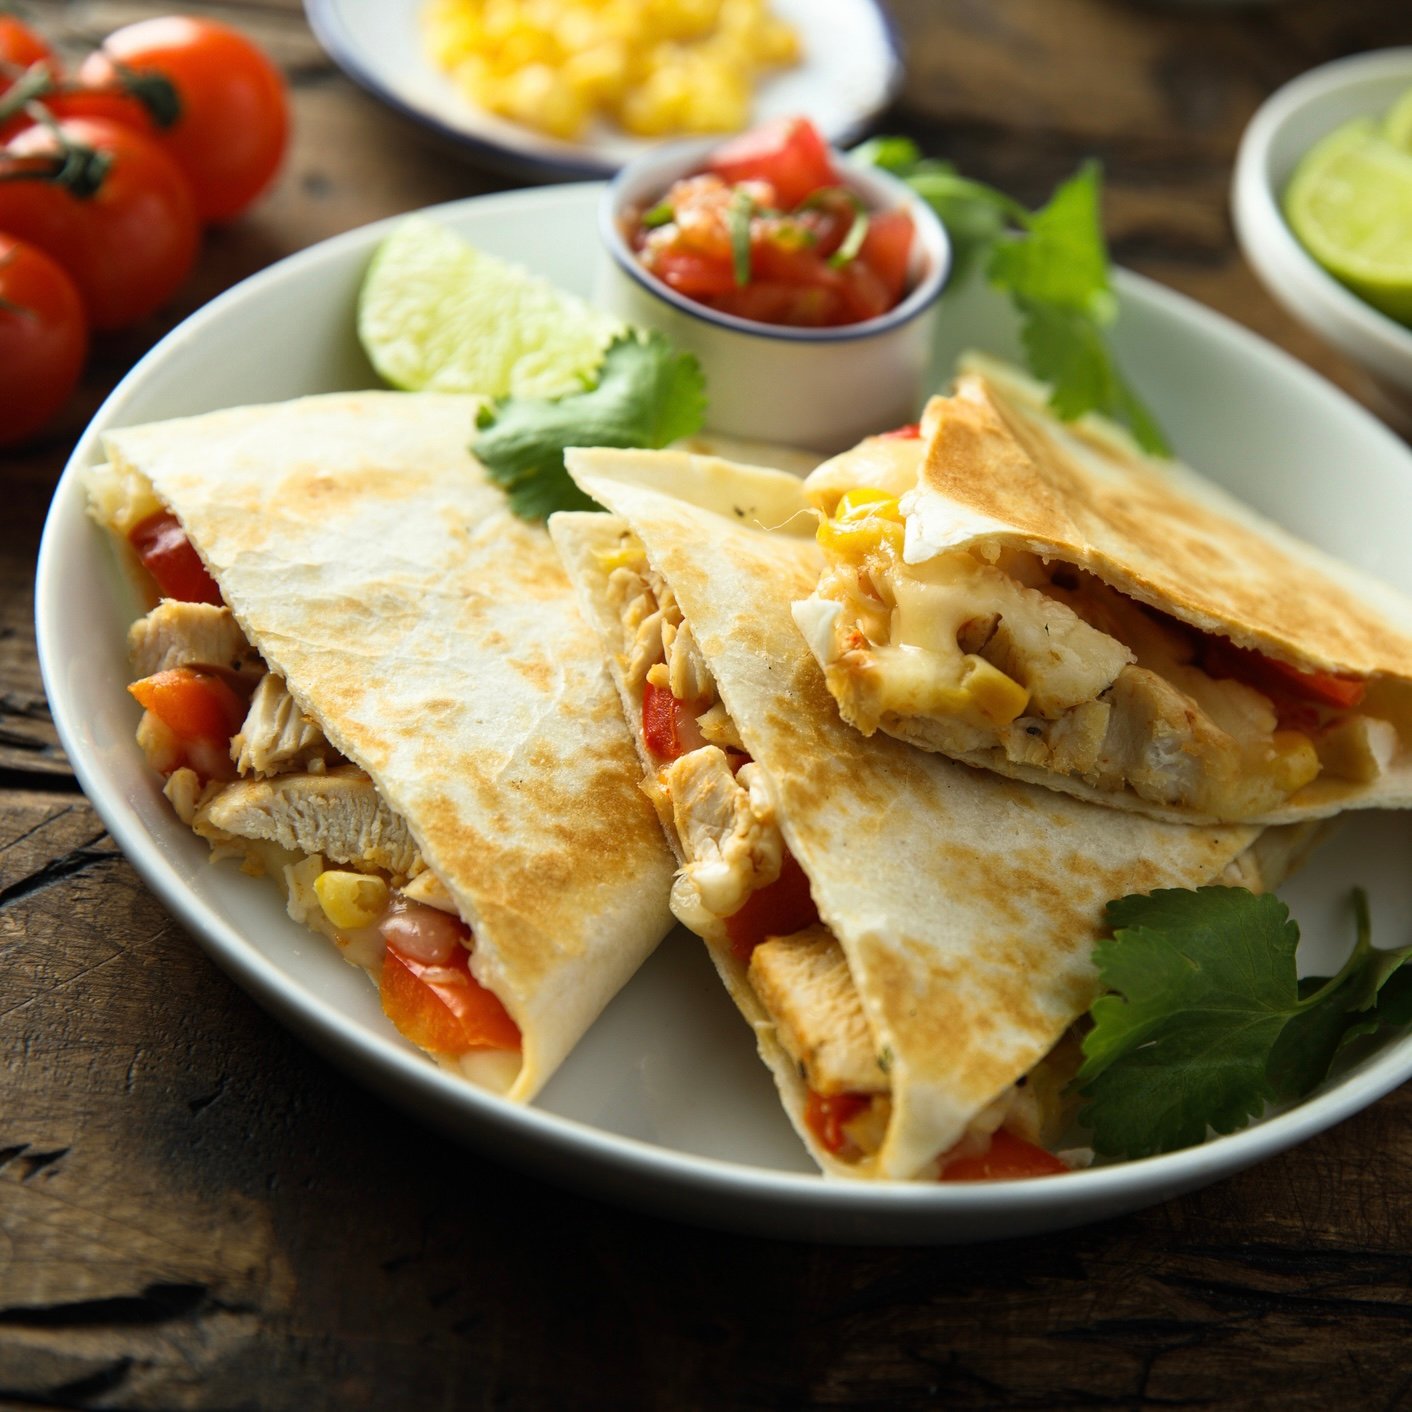 Quesadillas with chicken and vegetables - Healthy cuisine